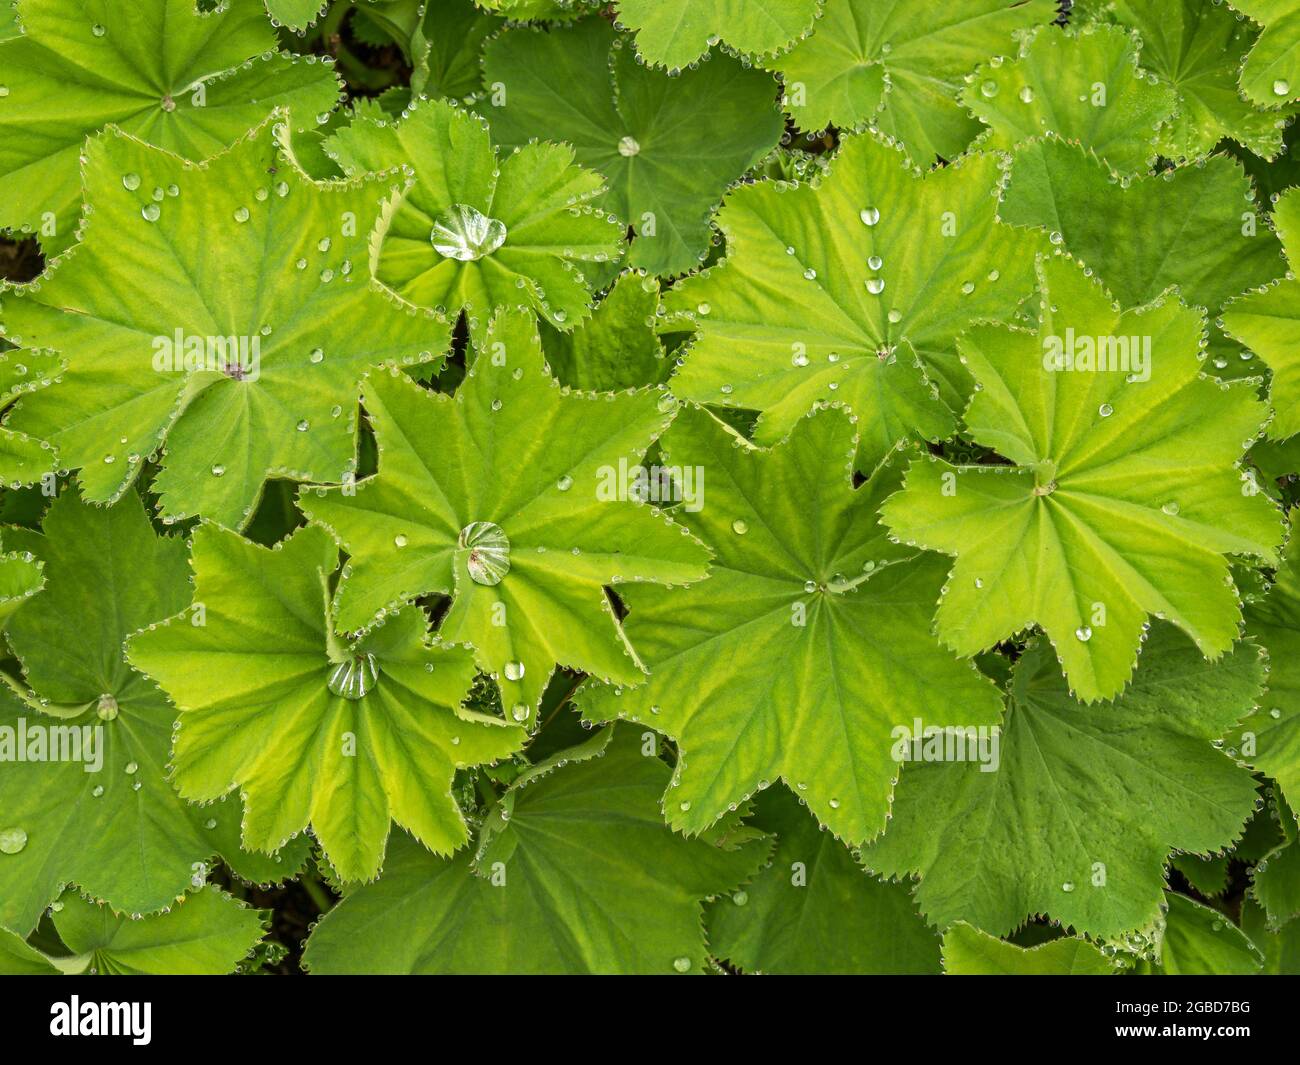 Green leaves of ladys mantle with water droplets Stock Photo